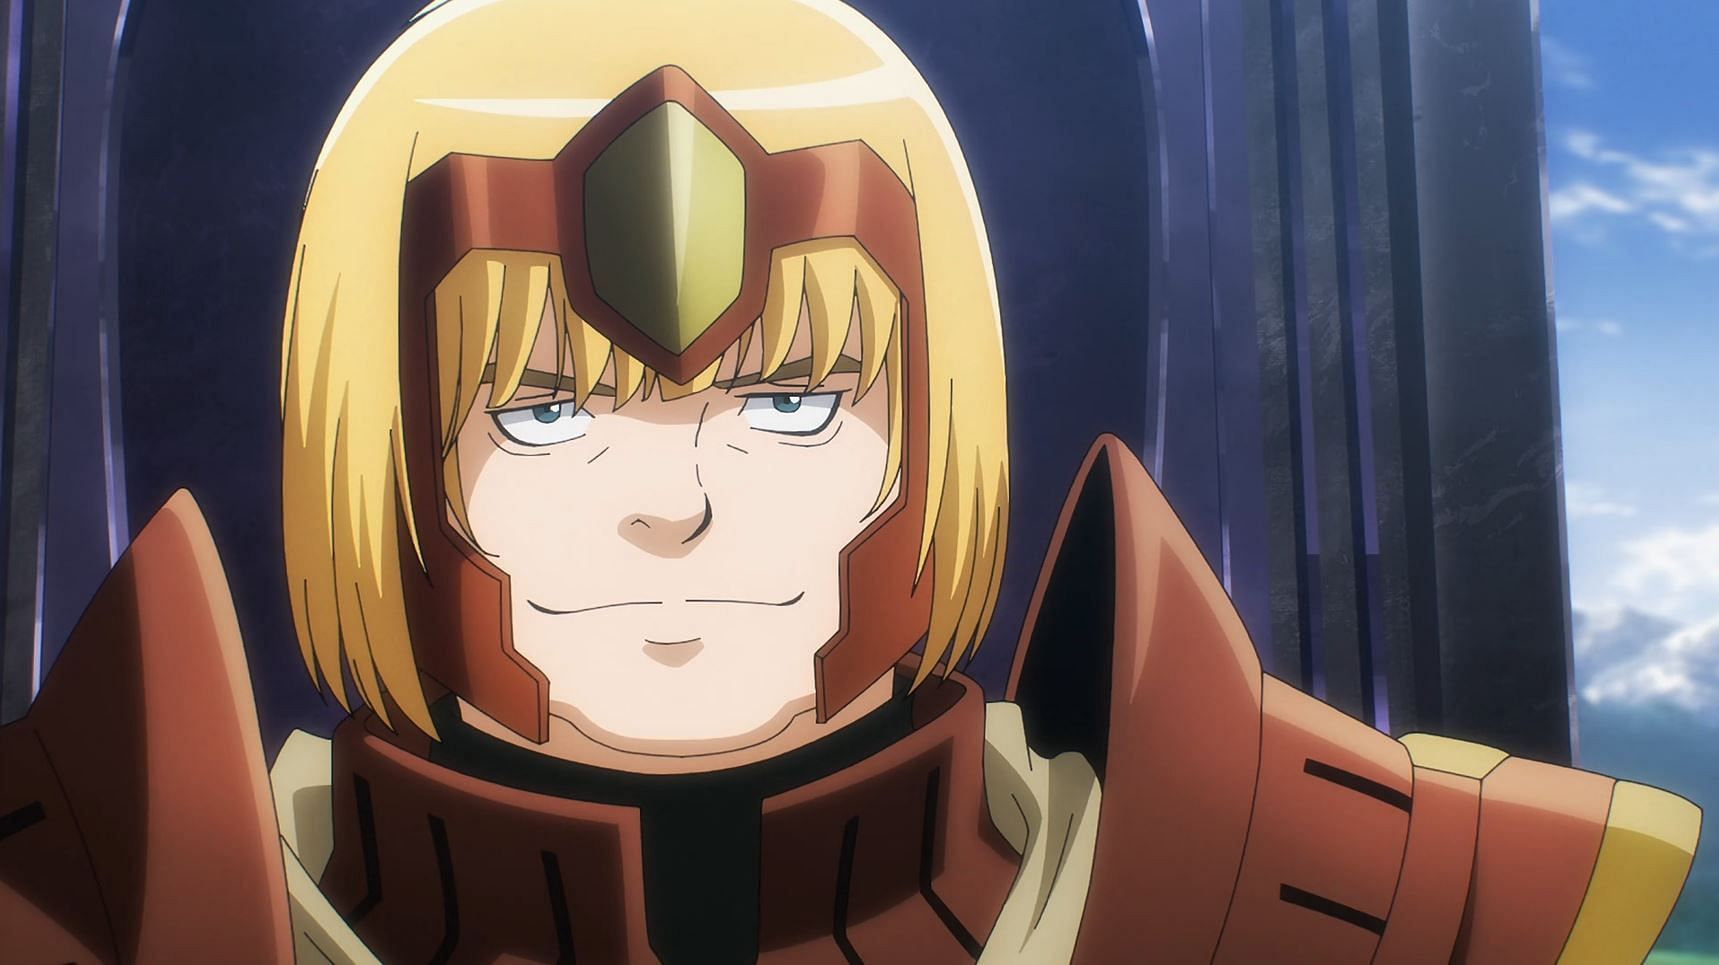 Overlord IV Episode 11 Review – War?